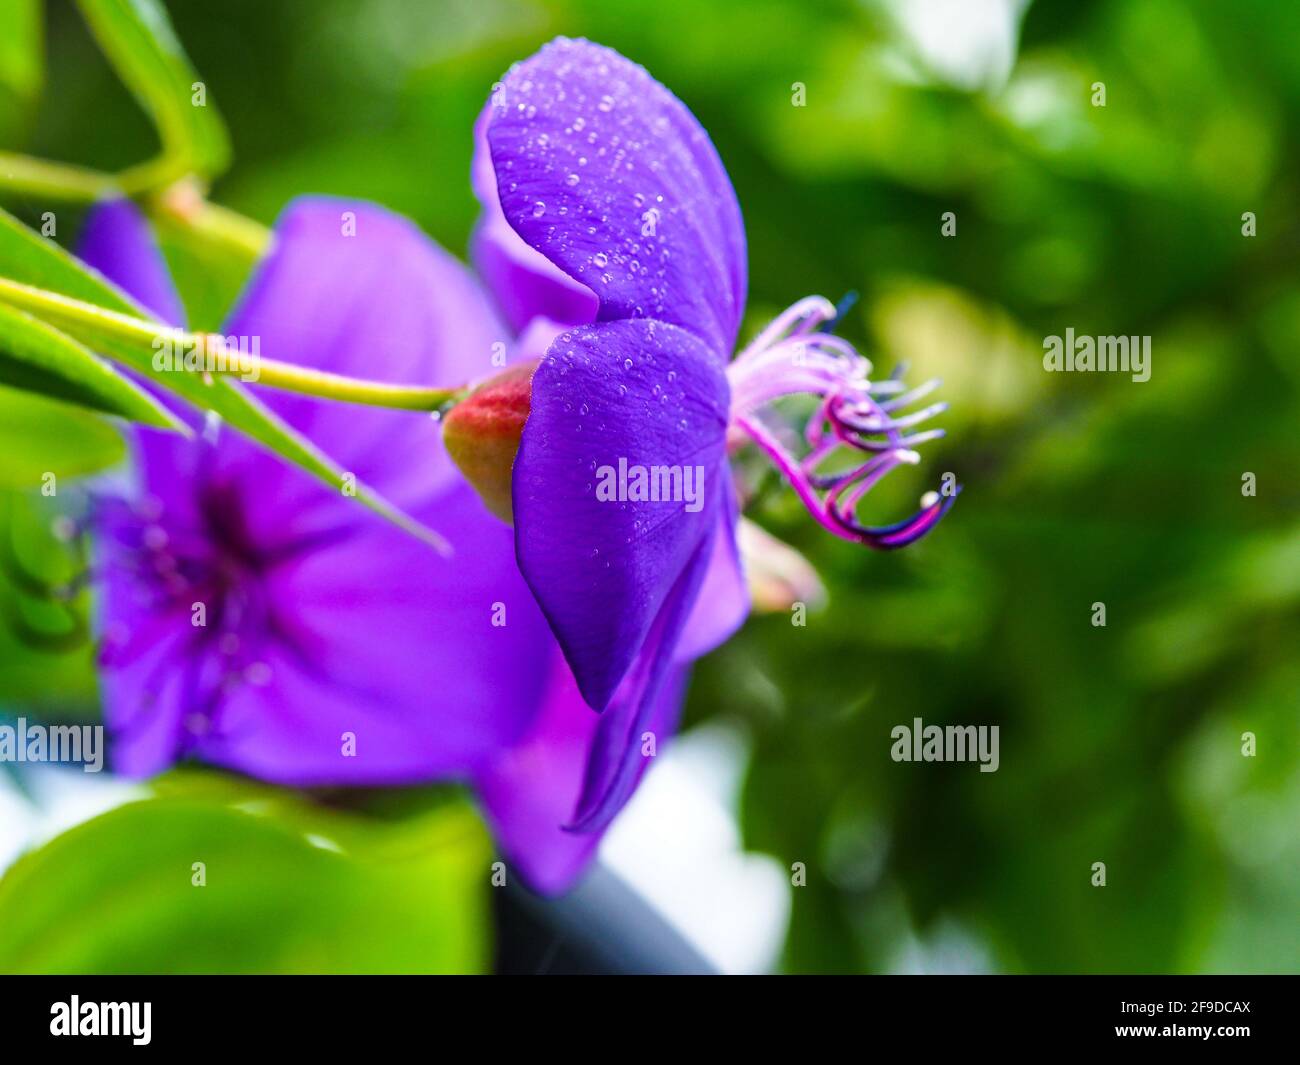 Closeup of the Large Purple petals of a Tibouchina flower covered in raindrops Stock Photo